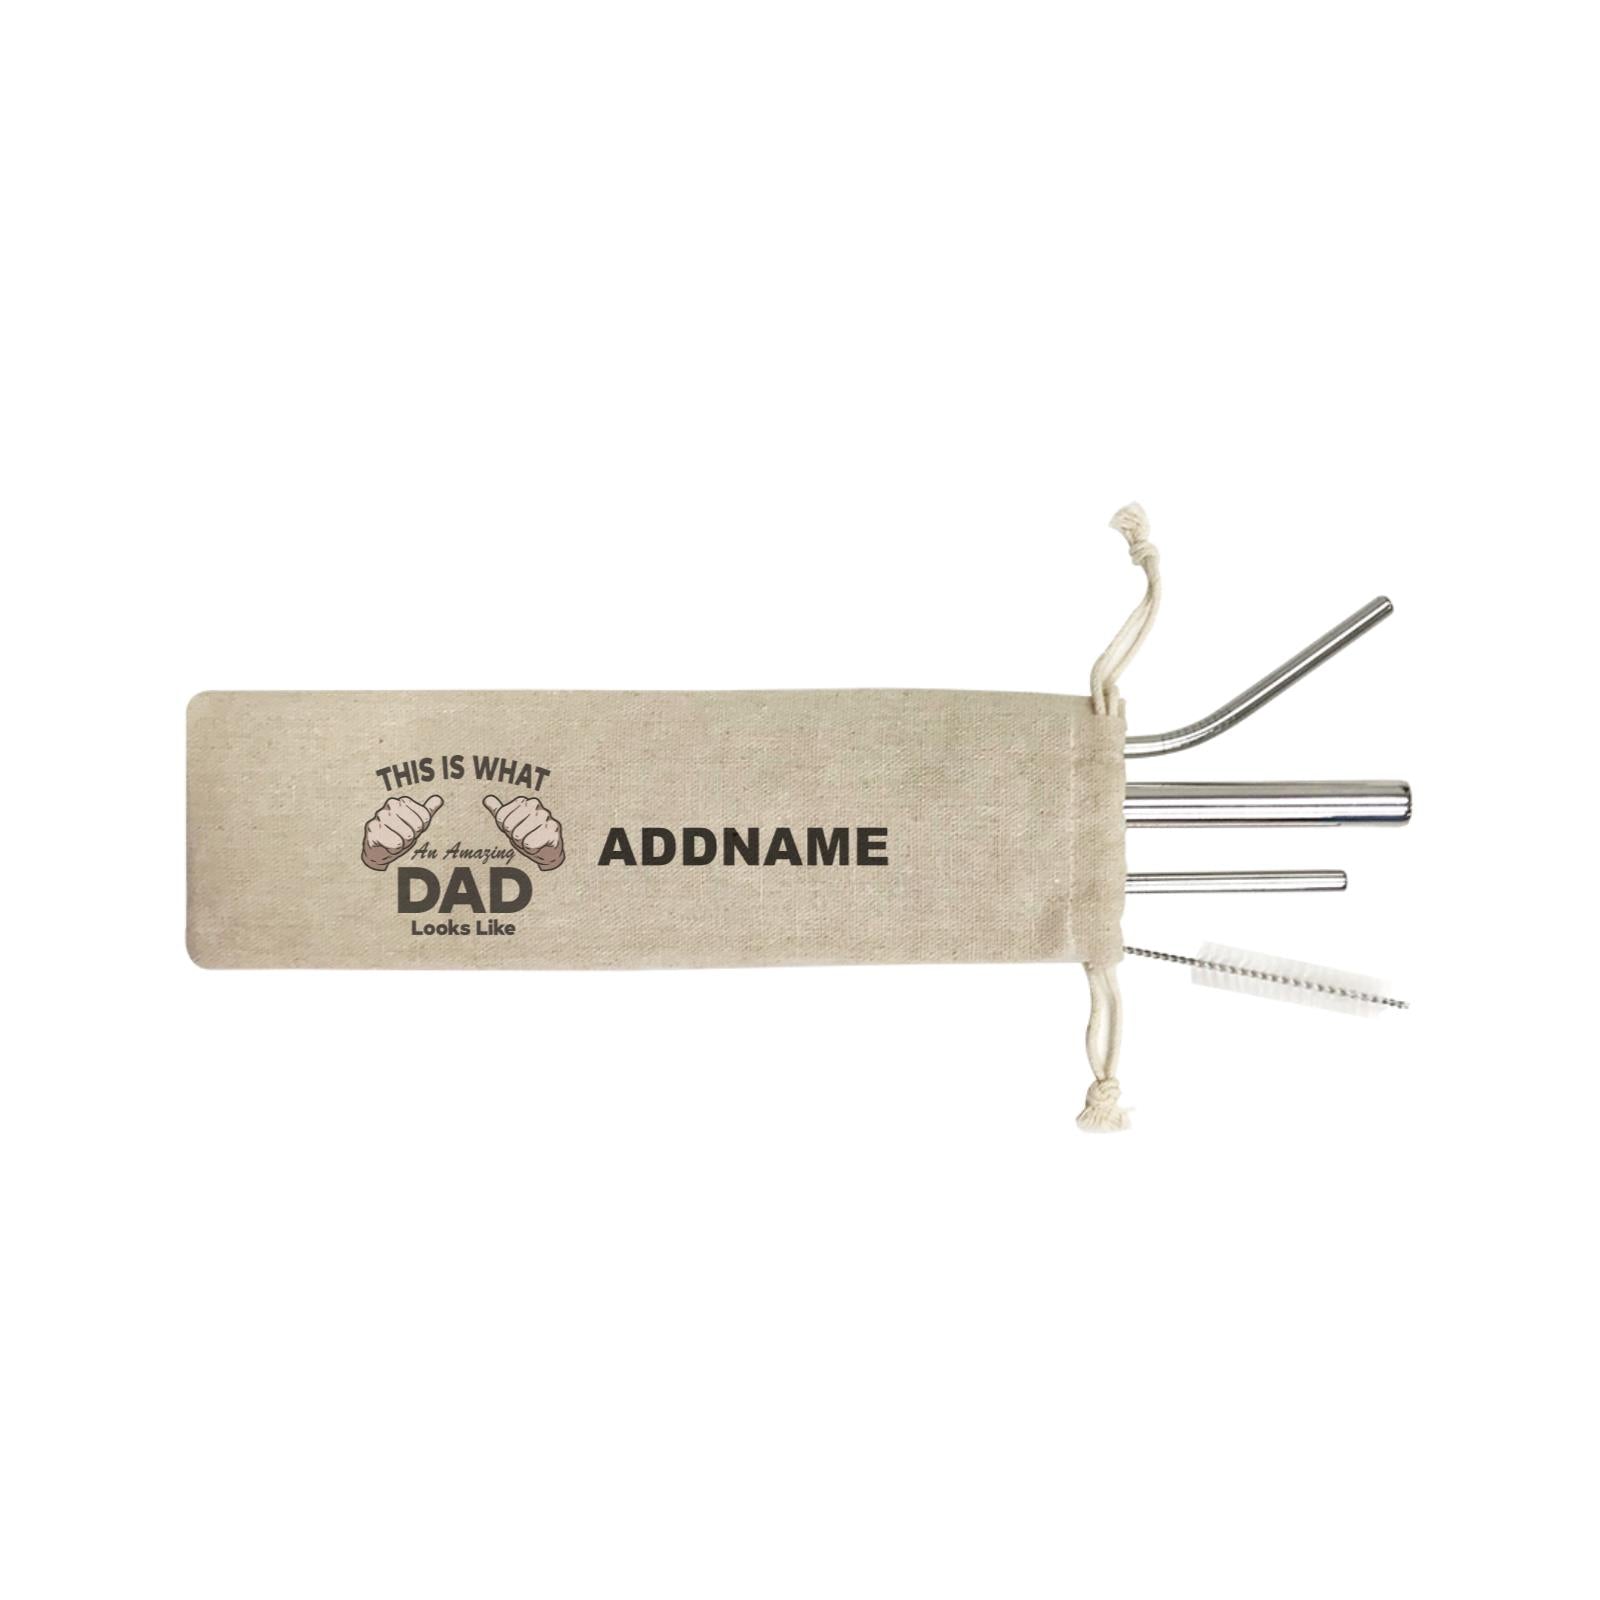 This is What An Amazing Dad Looks Like Addname SB 4-In-1 Stainless Steel Straw Set in Satchel